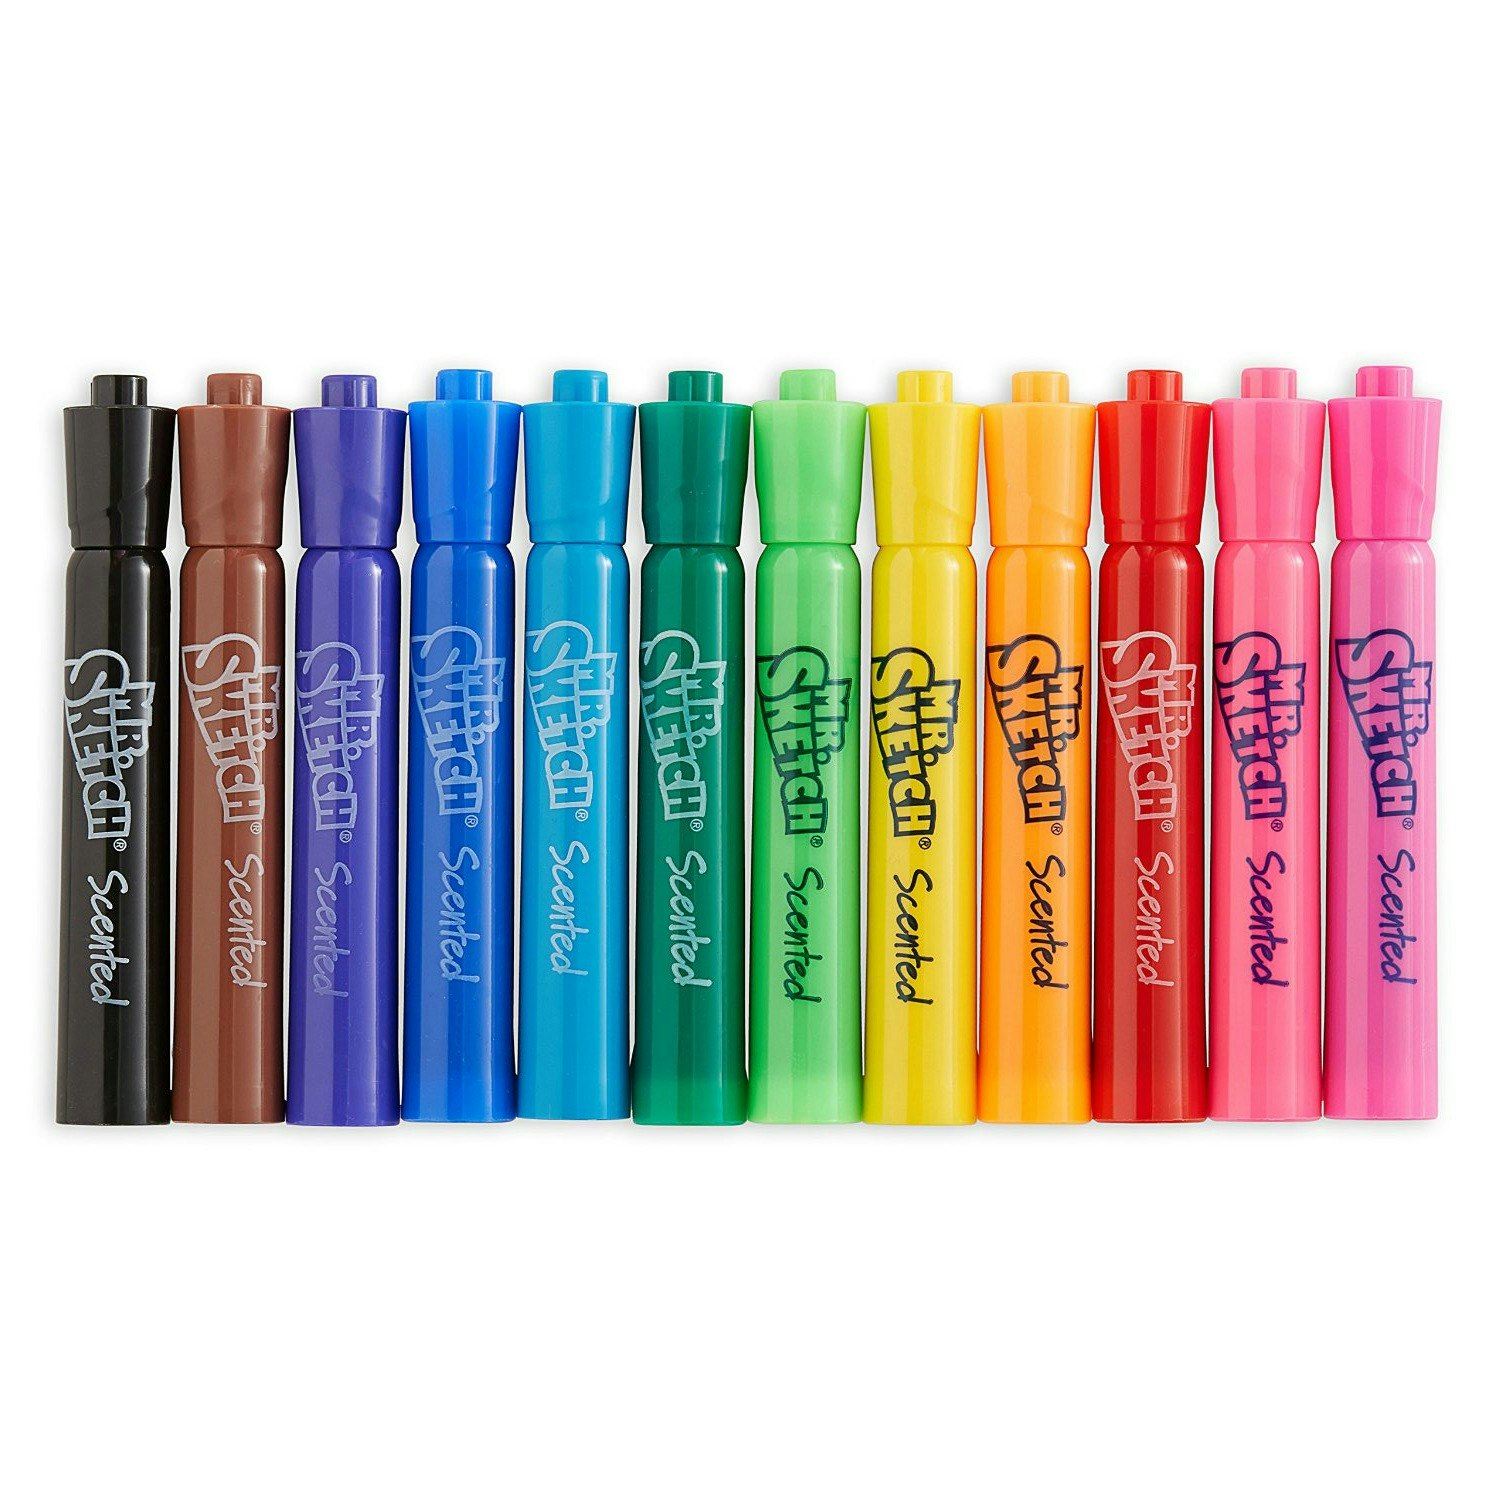 mr sketch scented markers